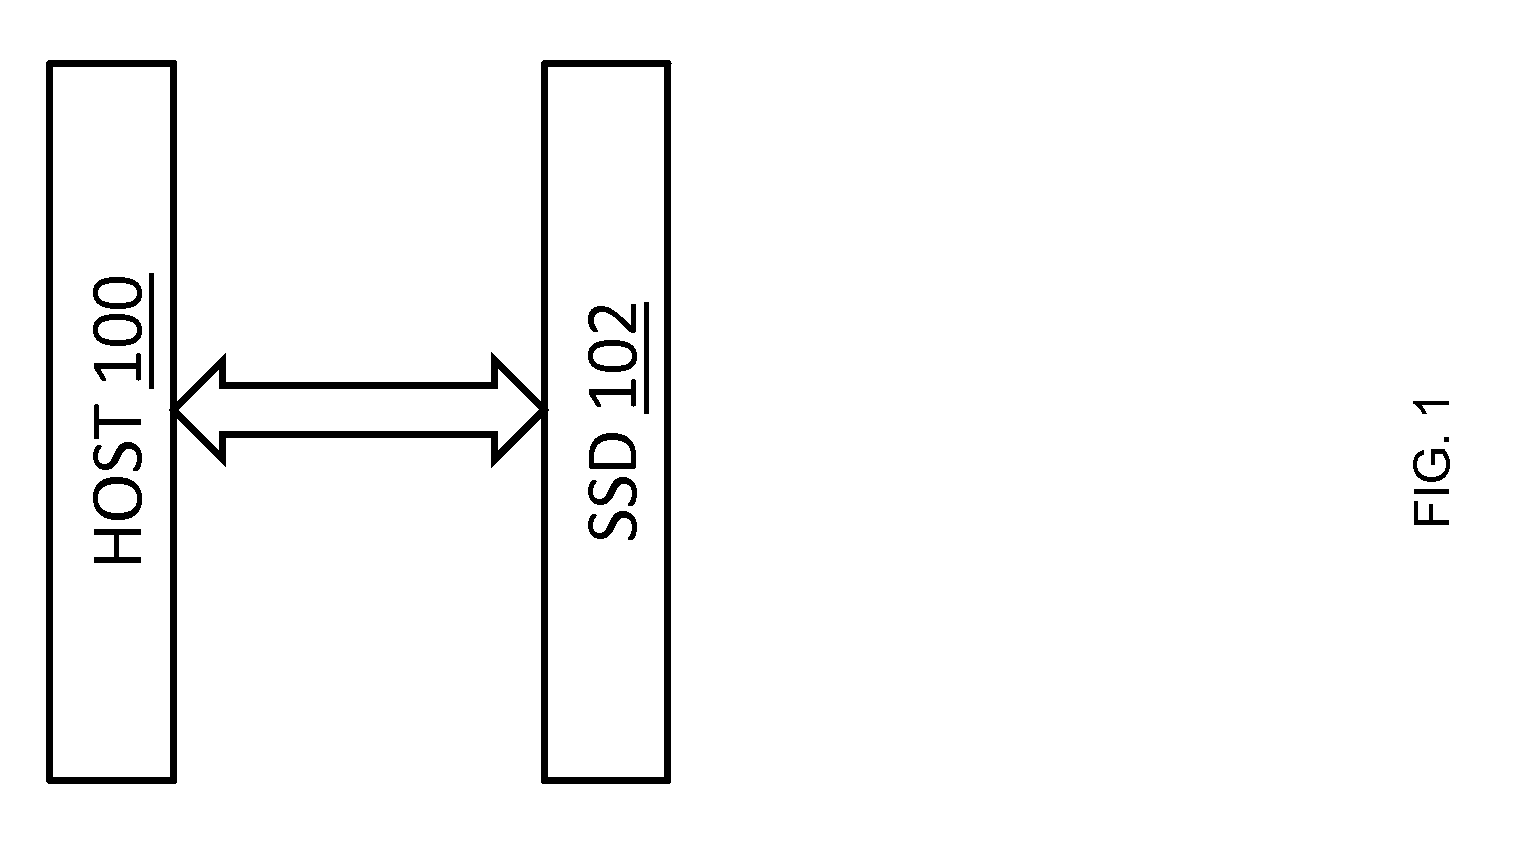 Pre-cache similarity-based delta compression for use in a data storage system